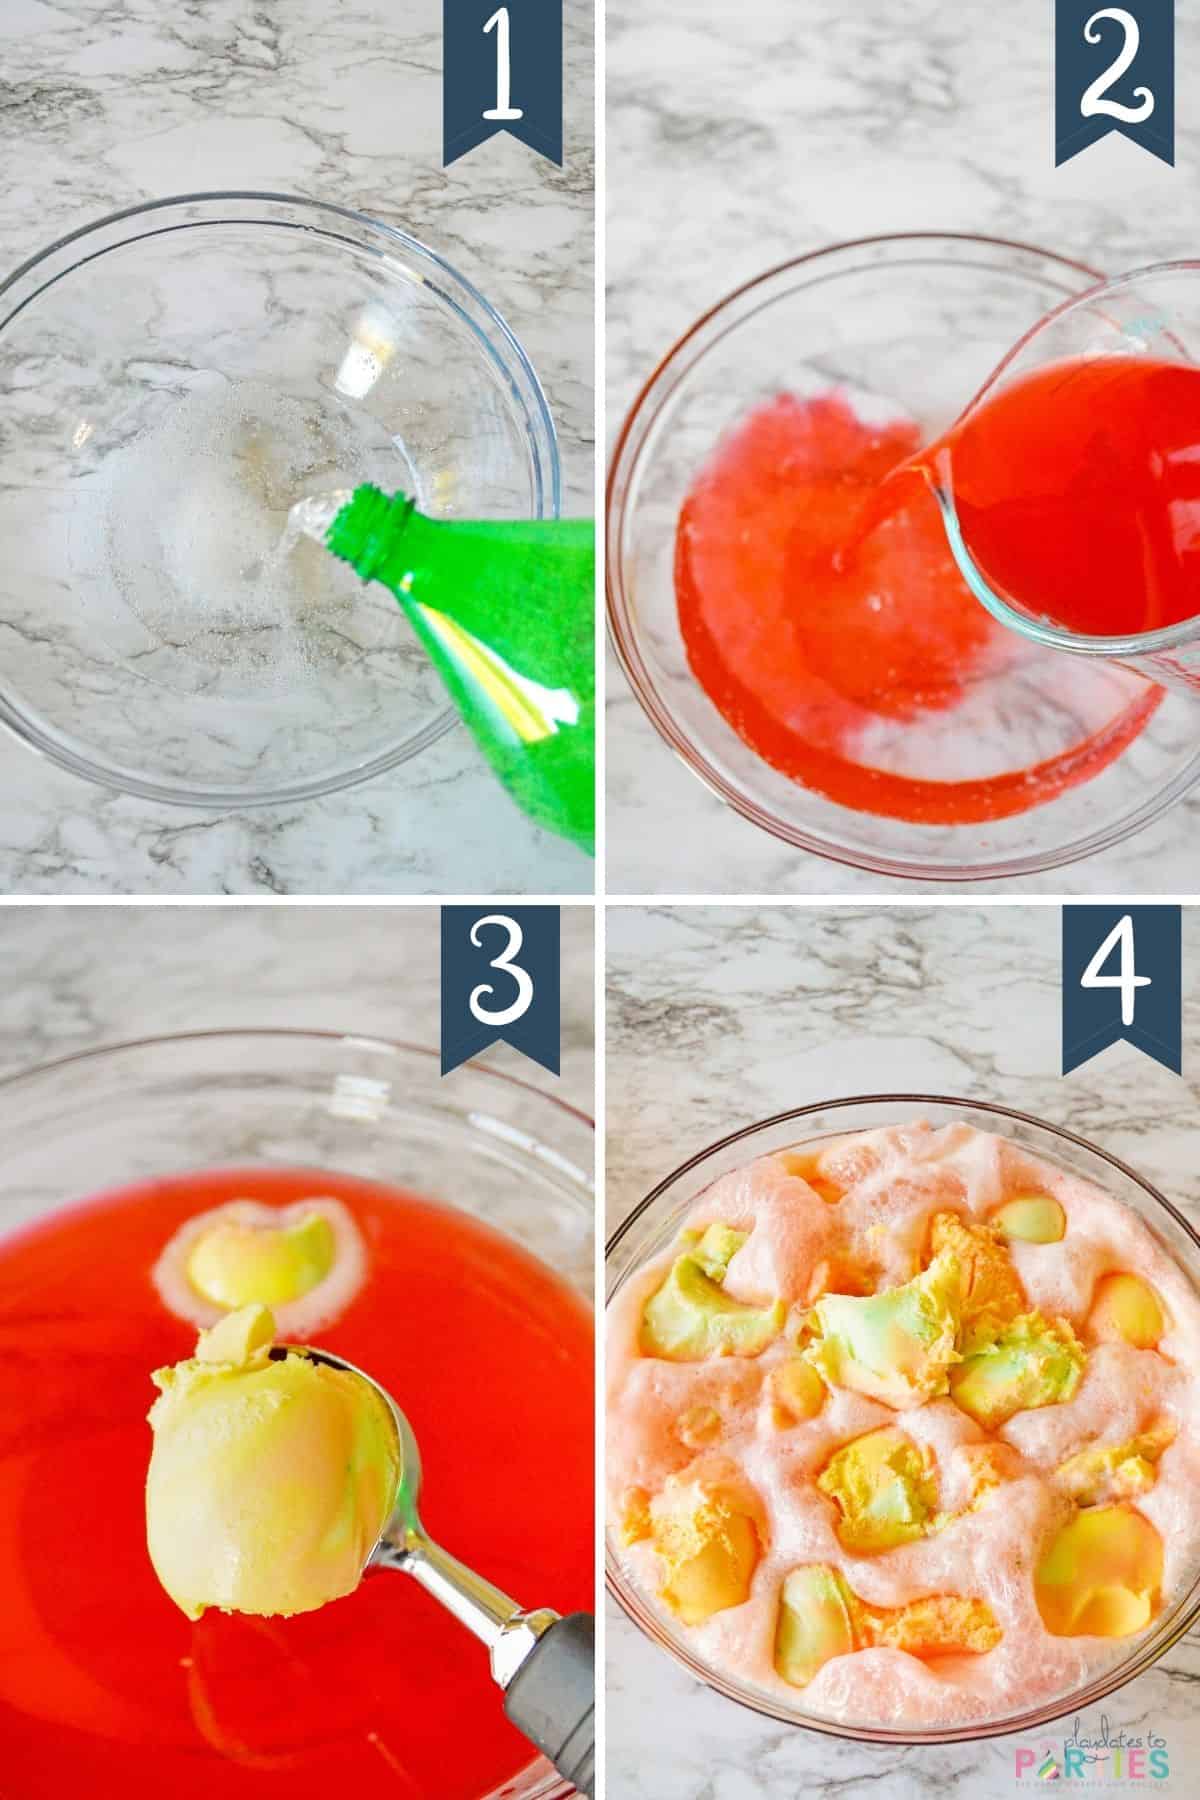 How to make rainbow sherbet punch steps 1 through 4.